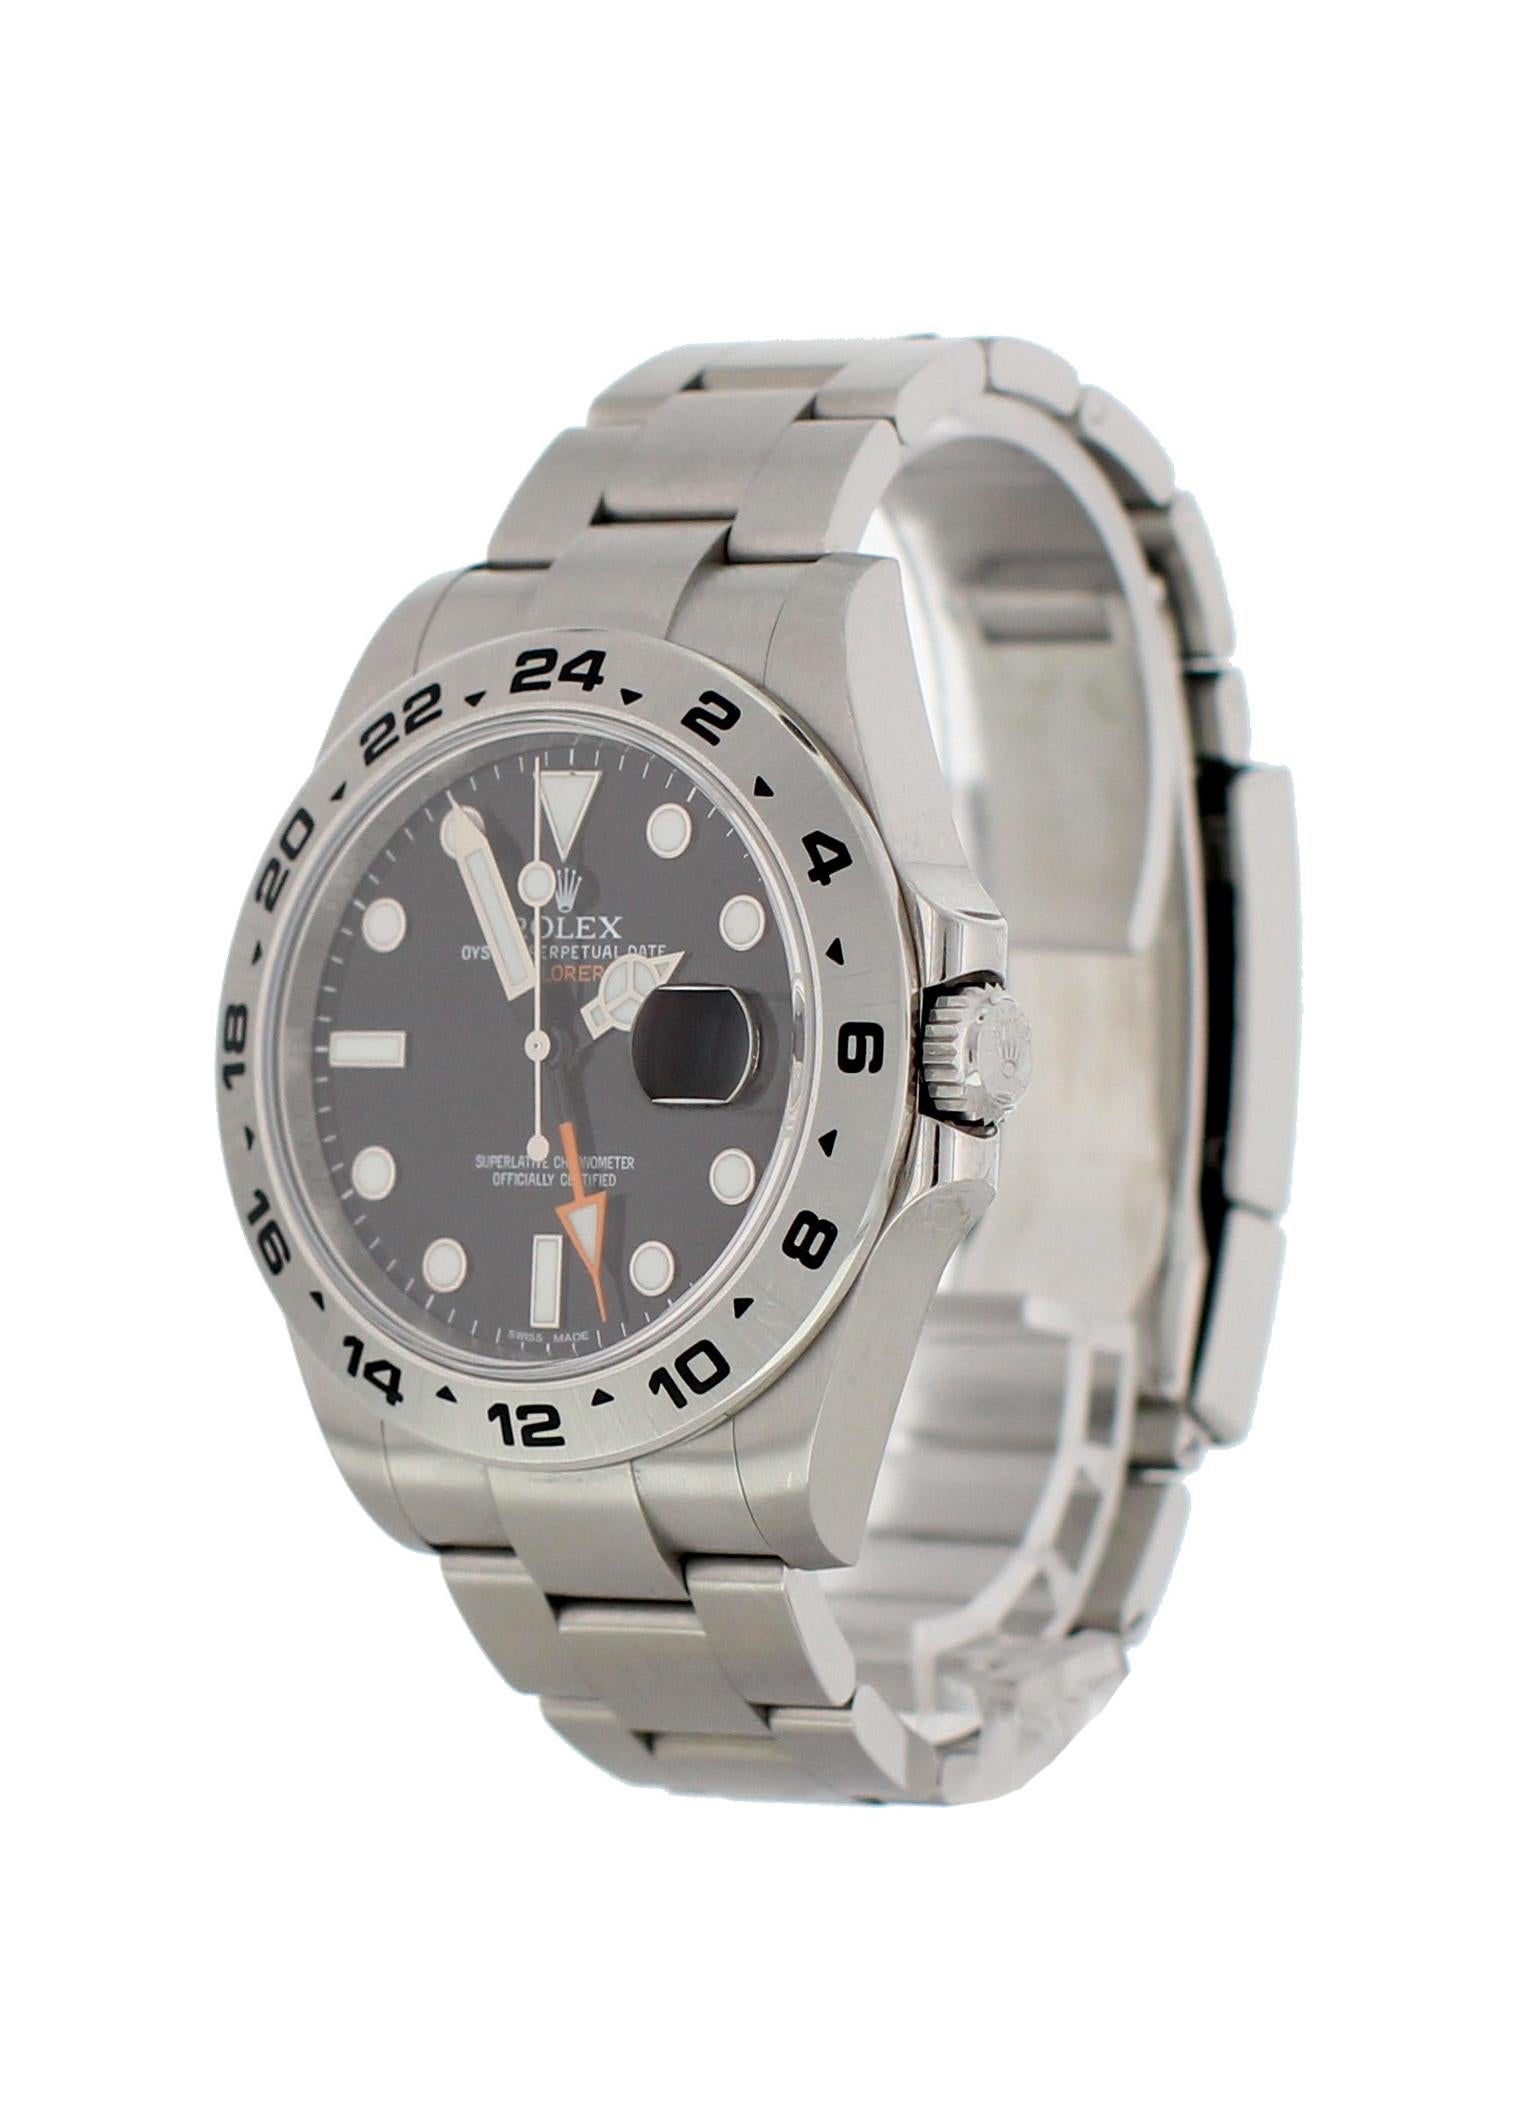 Rolex Explorer II 216570 Mens Watch. 
42mm Stainless Steel case. 
Stainless Steel Stationary bezel. 
Black dial.
Stainless Steel Oyster Bracelet with Flip-lock. 
Will fit up to a 7-inch wrist. 
Sapphire Crystal
Automatic self-winding movement.